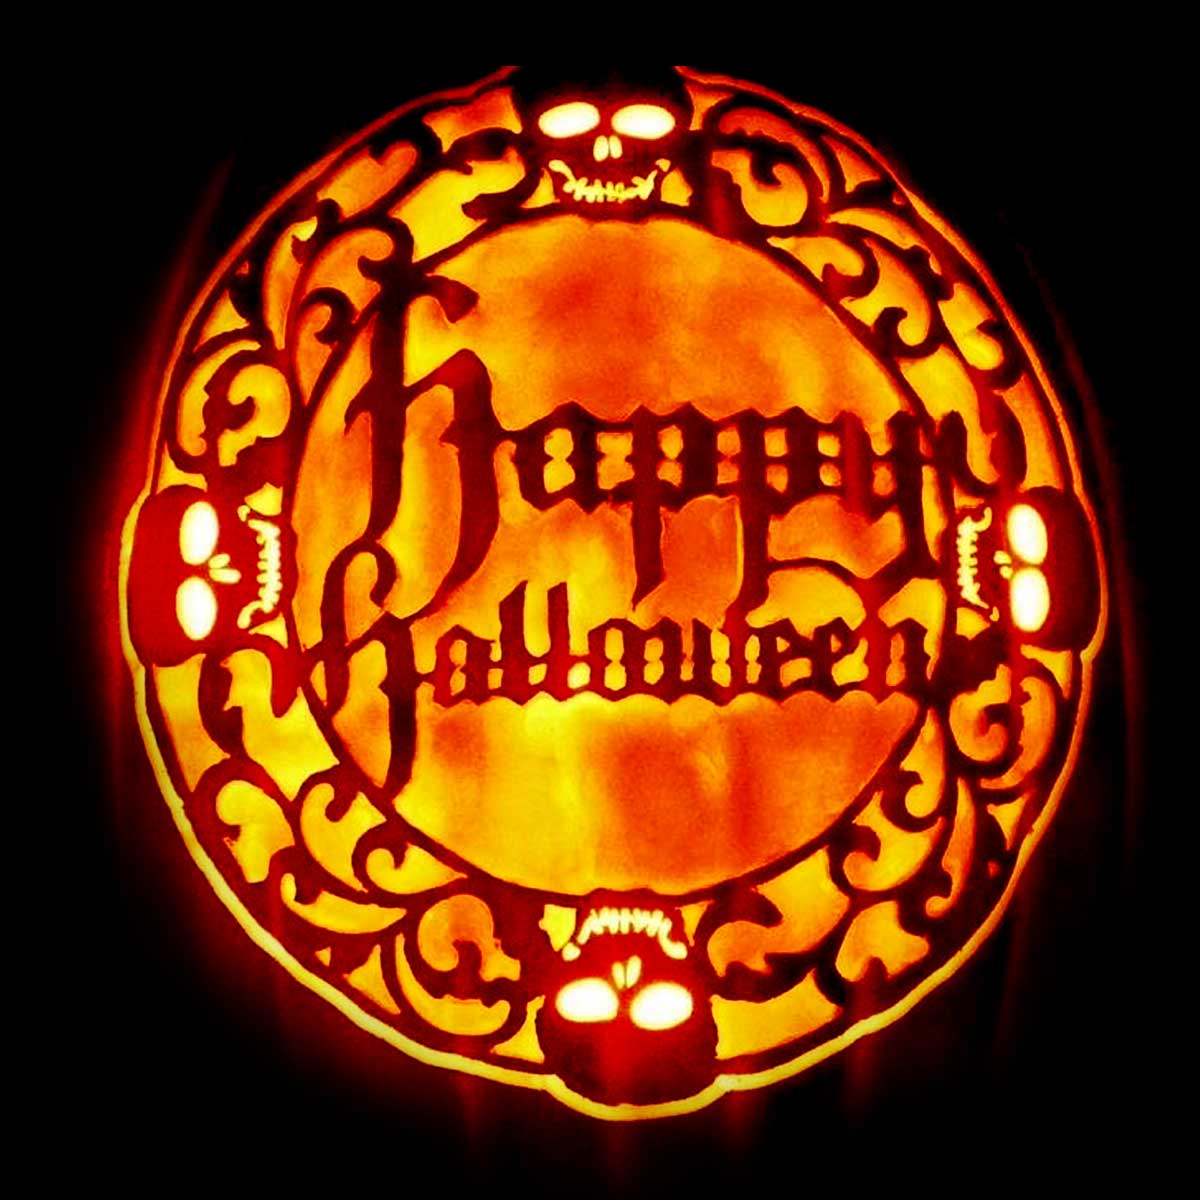 70+ Advanced Challenging Halloween Pumpkin Carving Ideas 2020 for ...